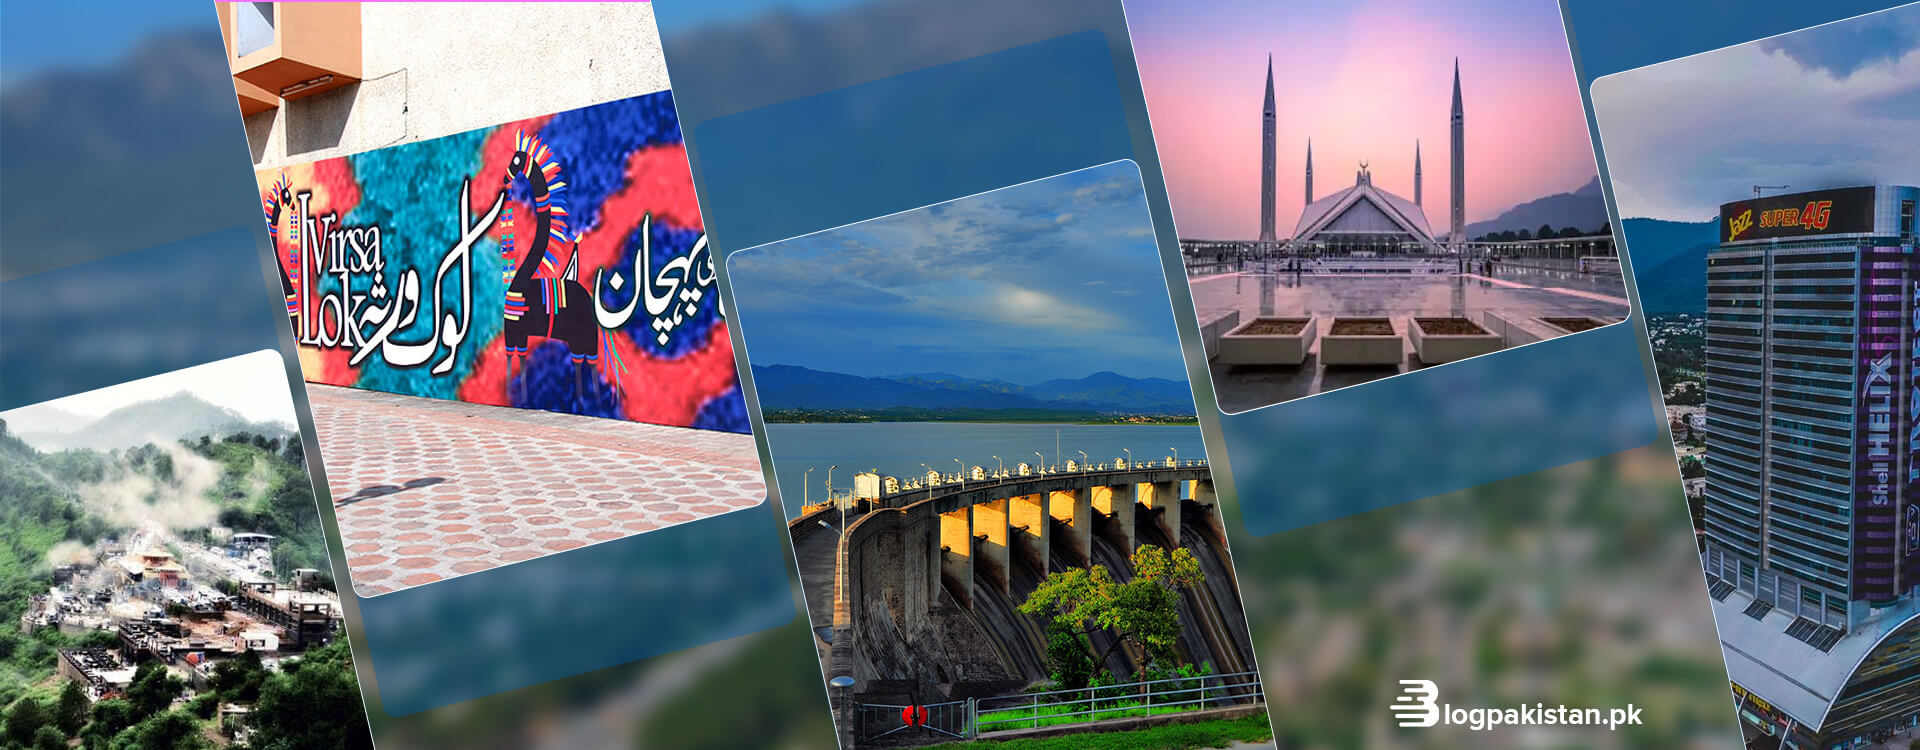 Places to Visit this Eid in Islamabad & Rawalpindi